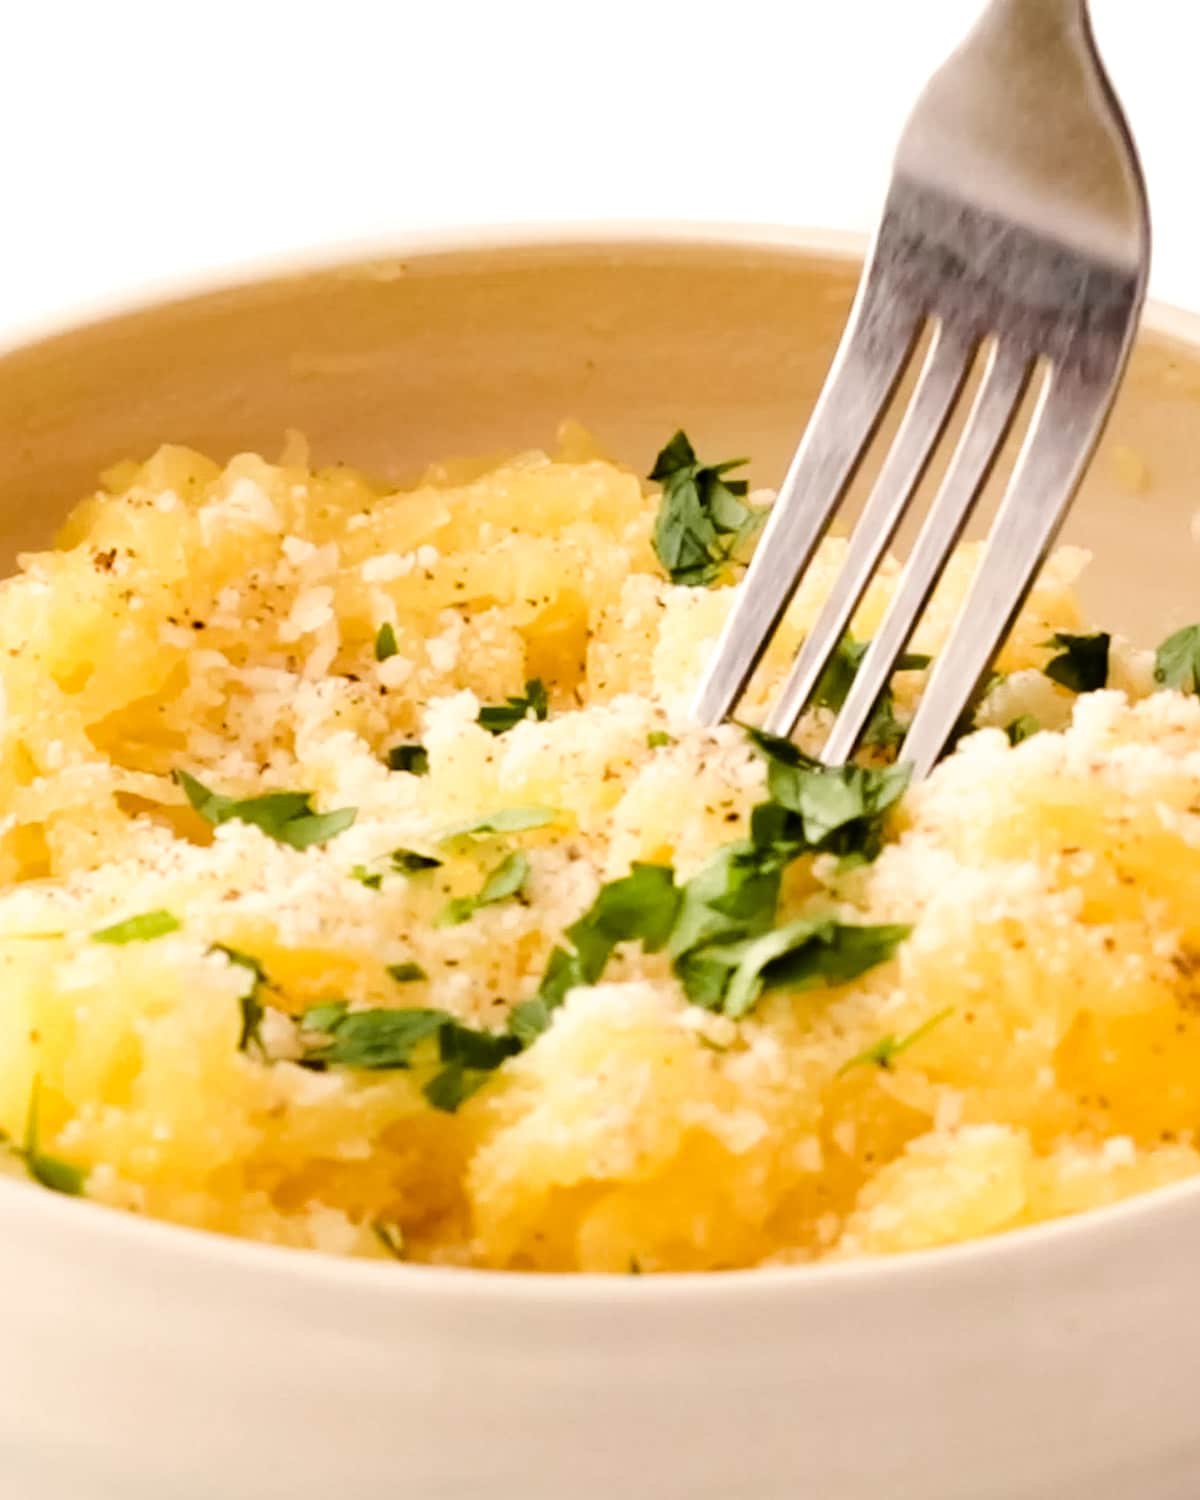 Bowl of spaghetti squash with a fork